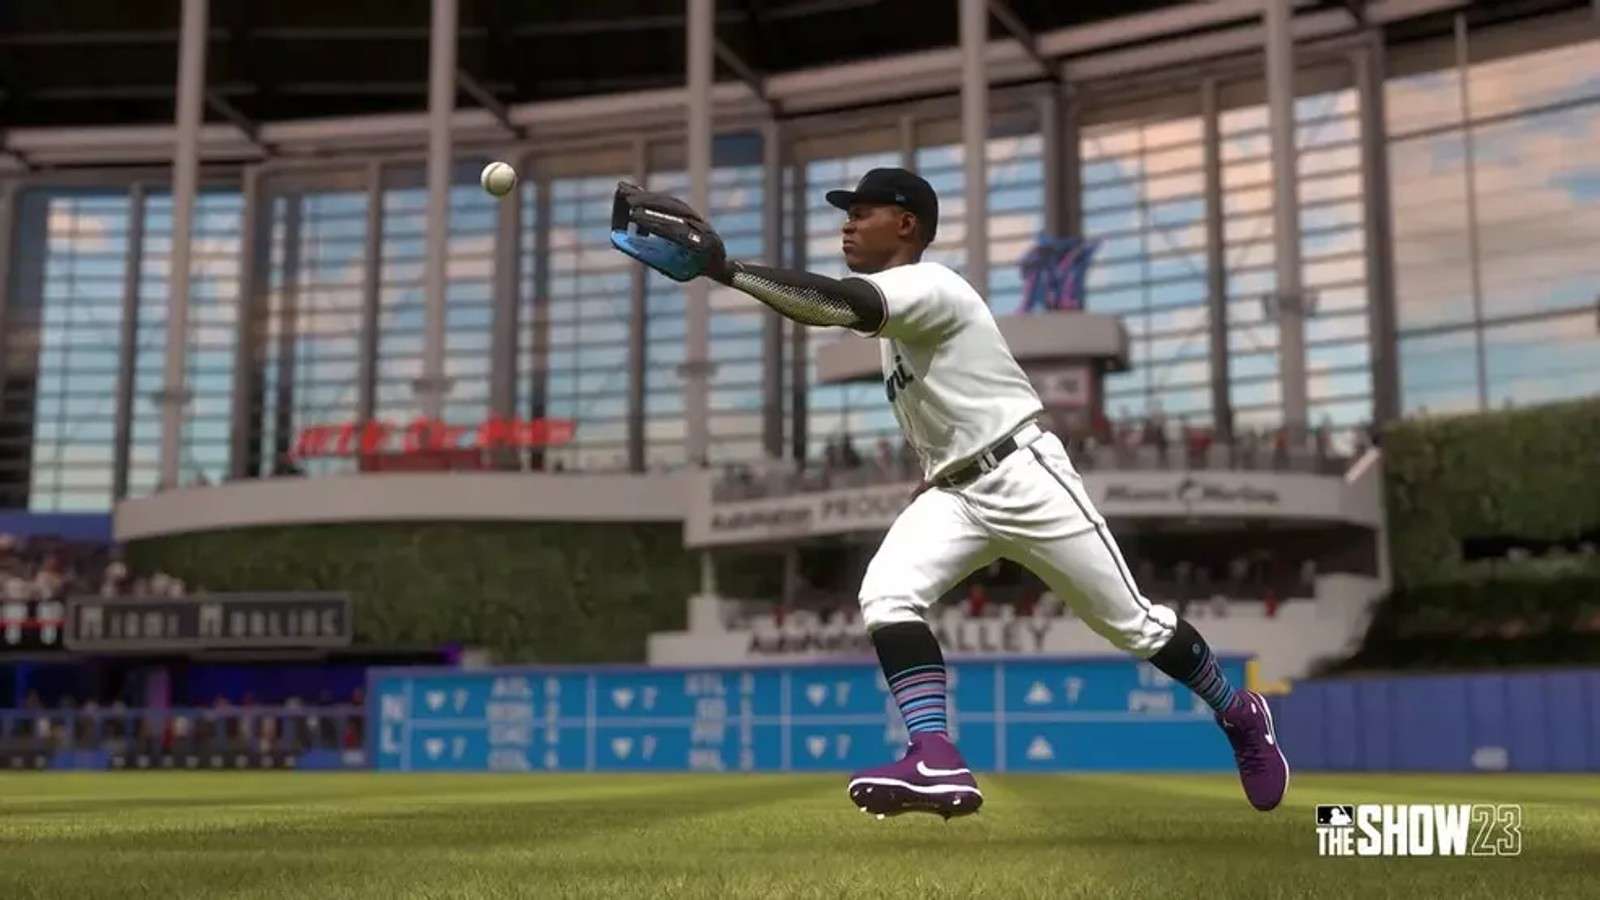 Jazz Chisholm in MLB The Show 23